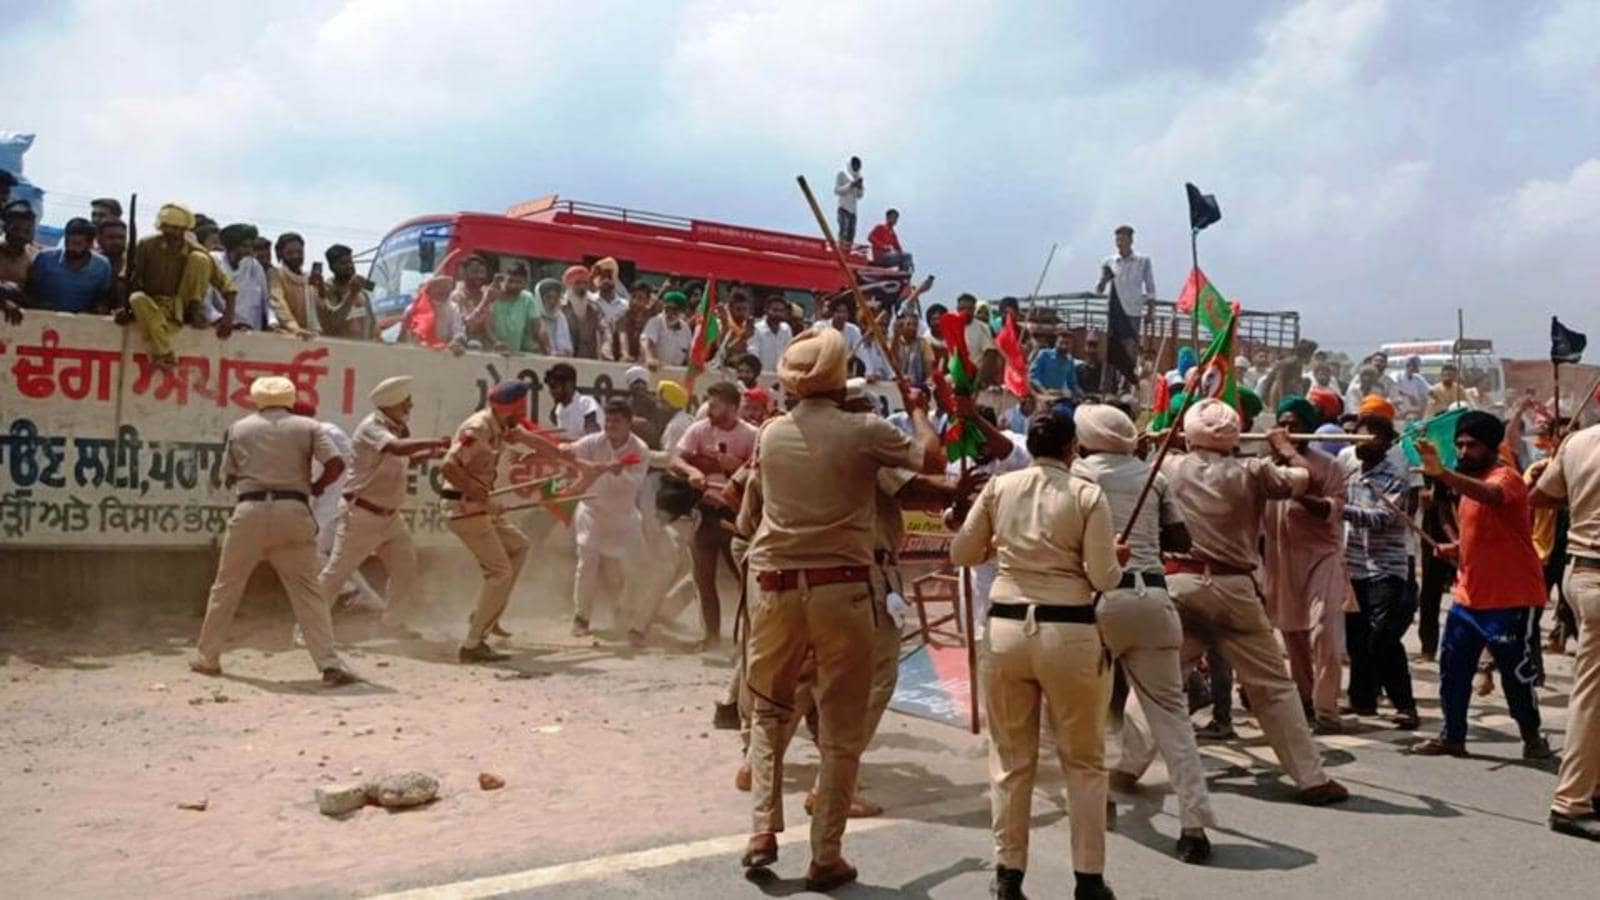 50 farmers, 7 cops injured in clashes near Badal rally in Punjab's